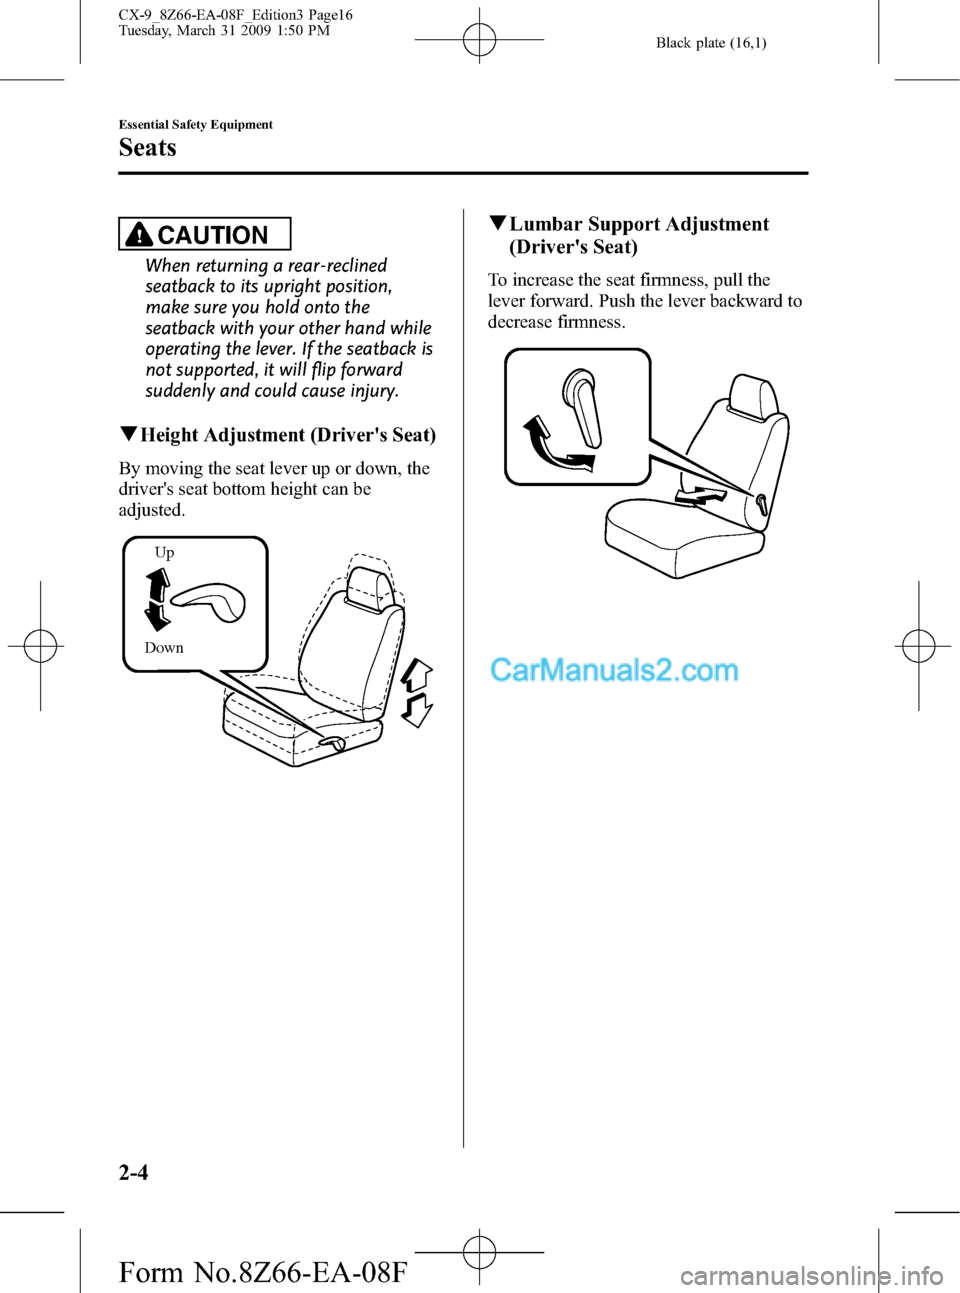 MAZDA MODEL CX-9 2009   (in English) User Guide Black plate (16,1)
CAUTION
When returning a rear-reclined
seatback to its upright position,
make sure you hold onto the
seatback with your other hand while
operating the lever. If the seatback is
not 